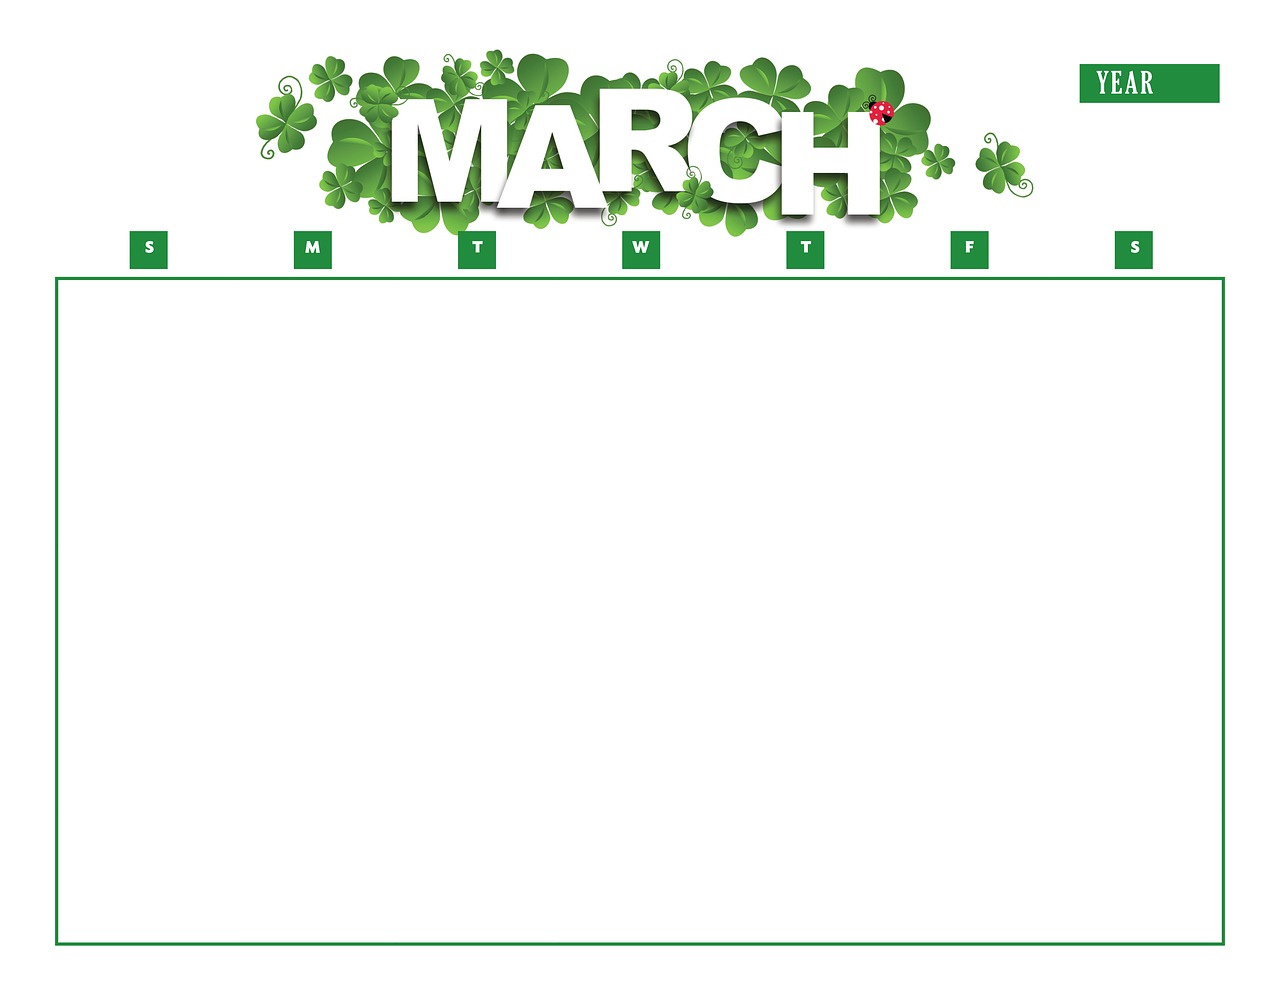 download-free-photo-of-calendar-march-year-month-calendar-template